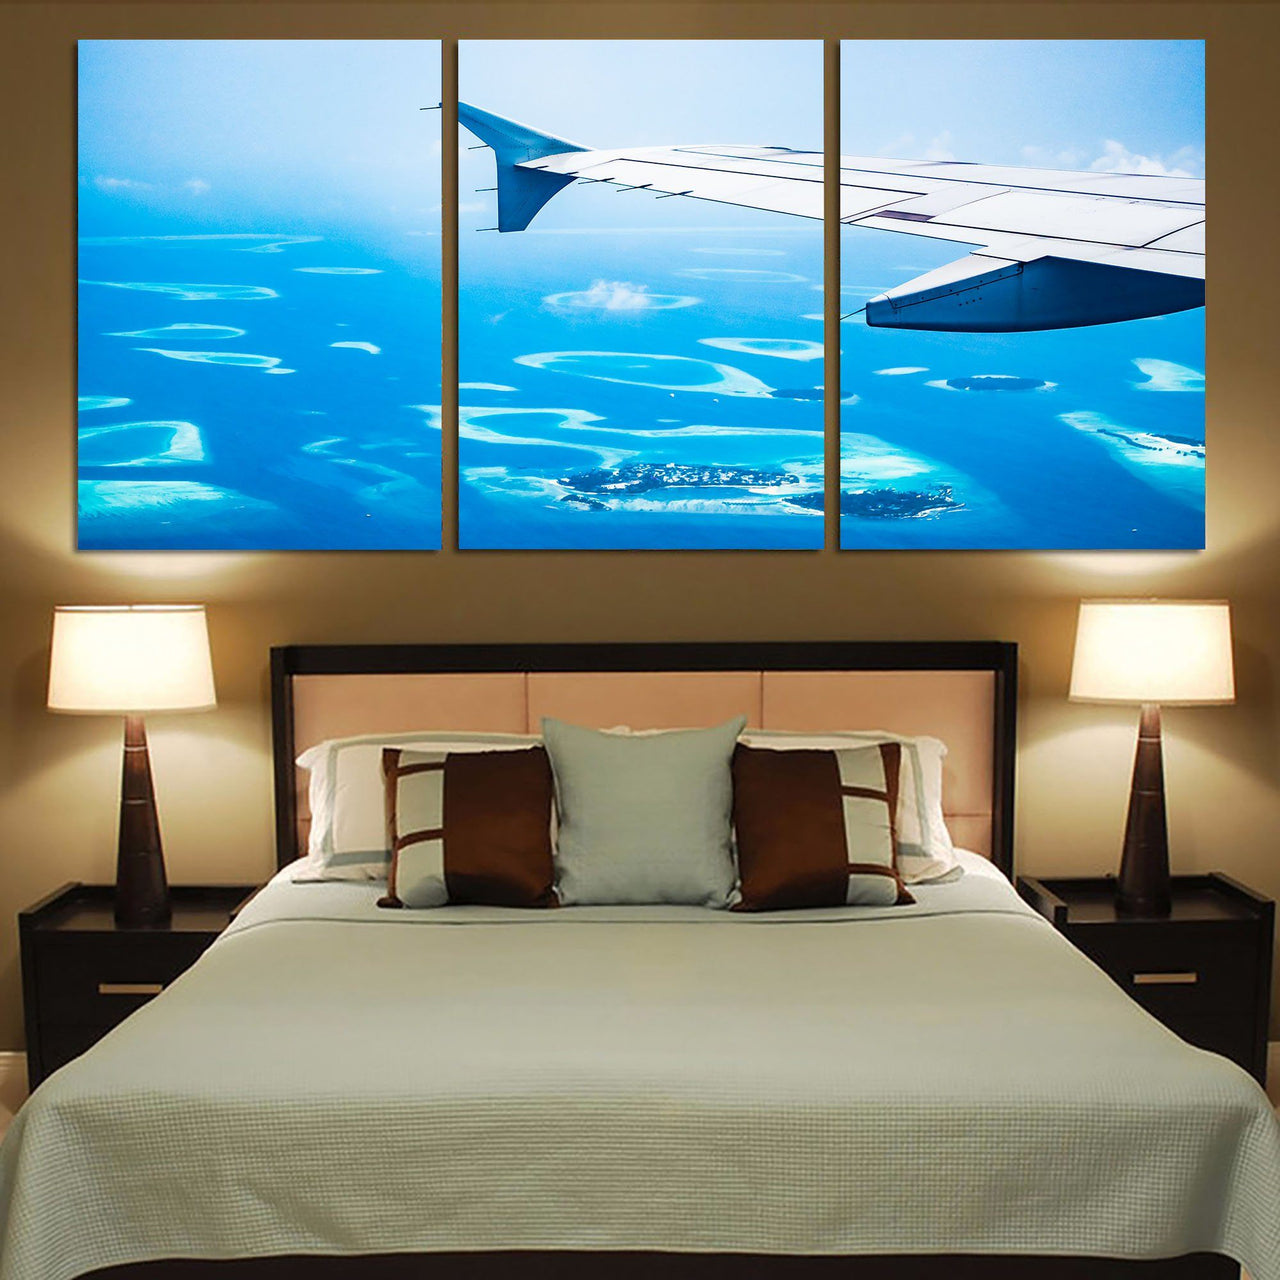 Outstanding View Through Airplane Wing Printed Canvas Posters (3 Pieces) Aviation Shop 